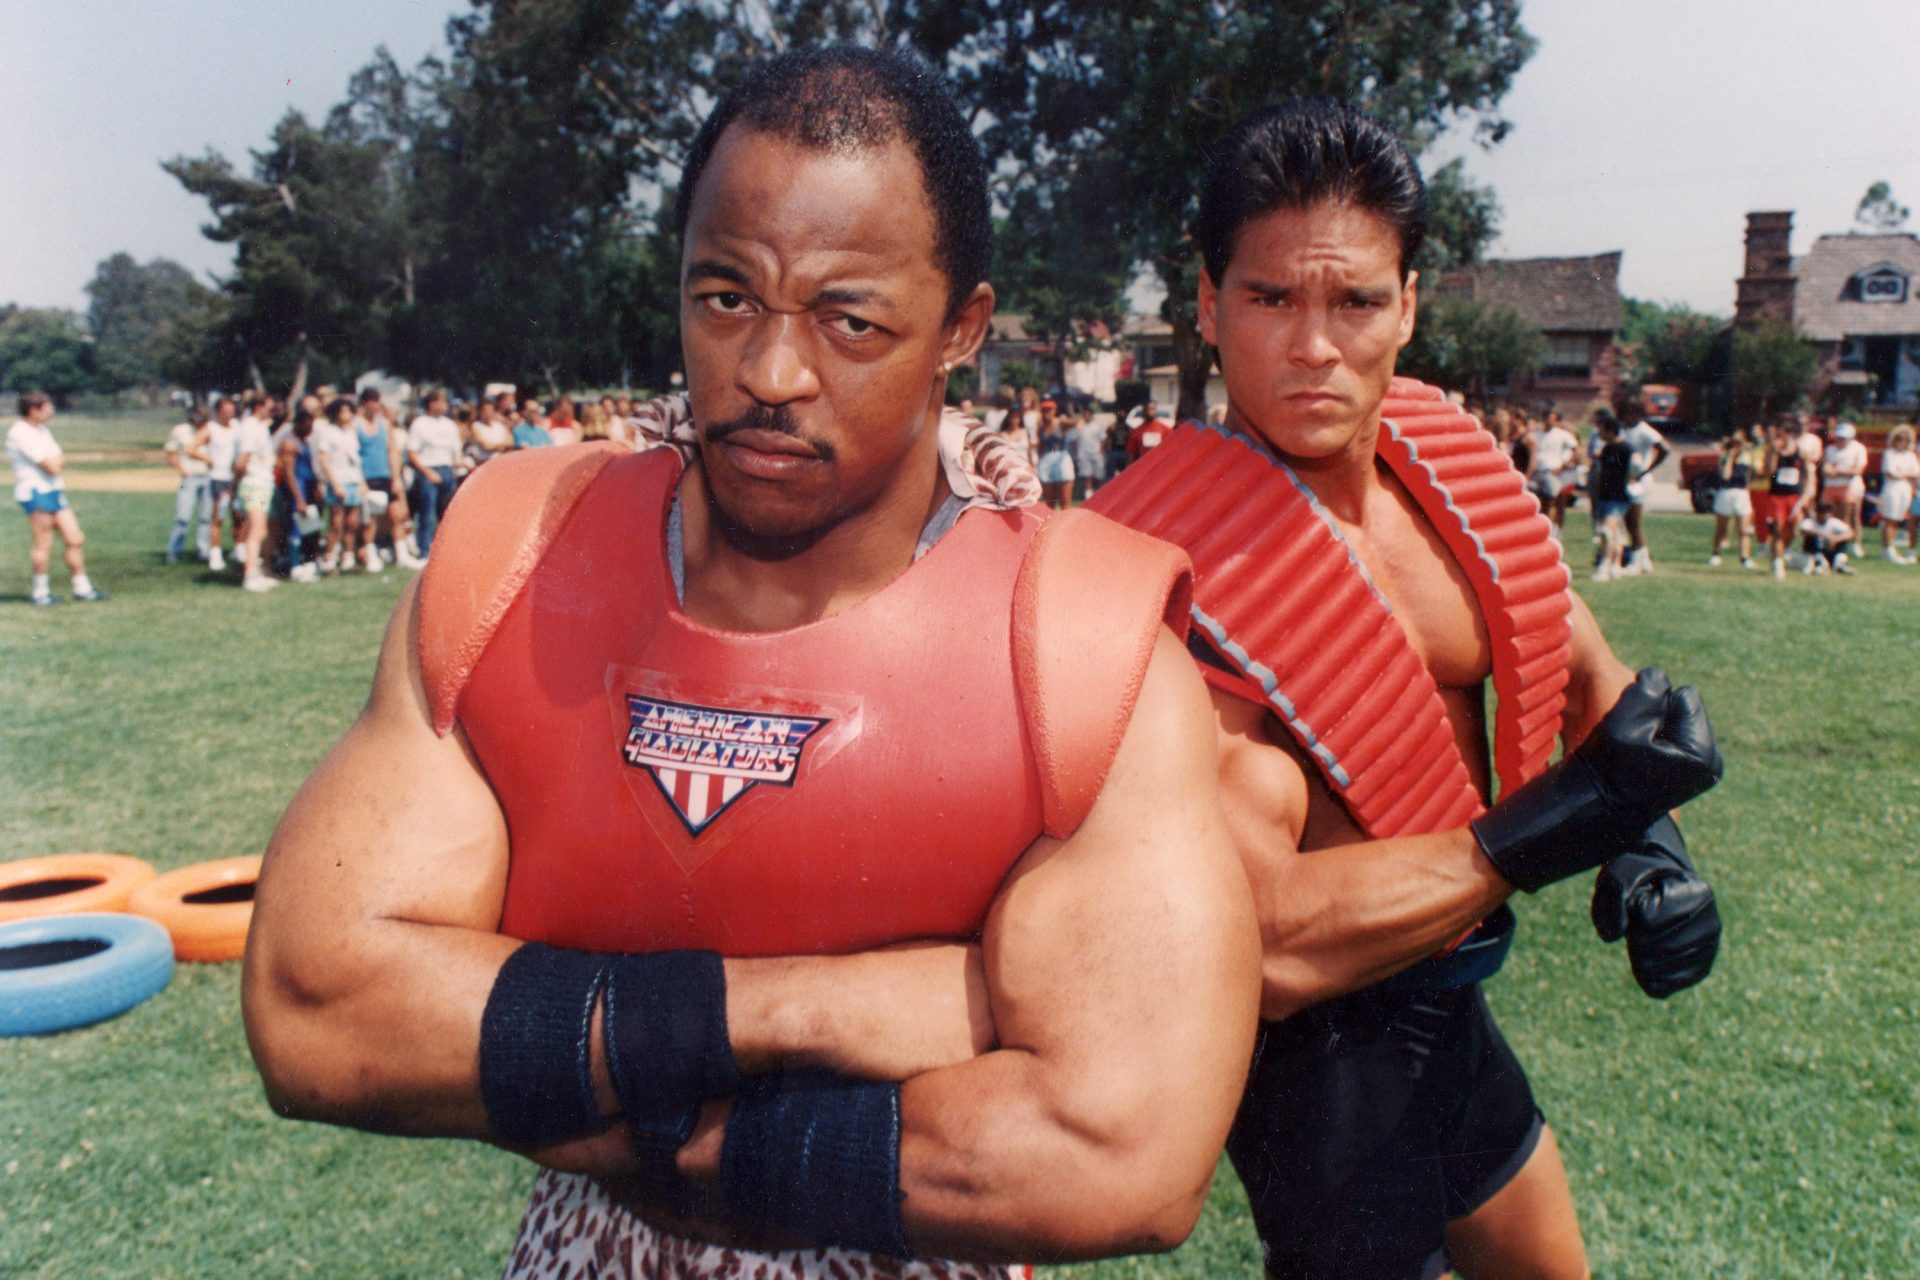 What happened to the American Gladiators?